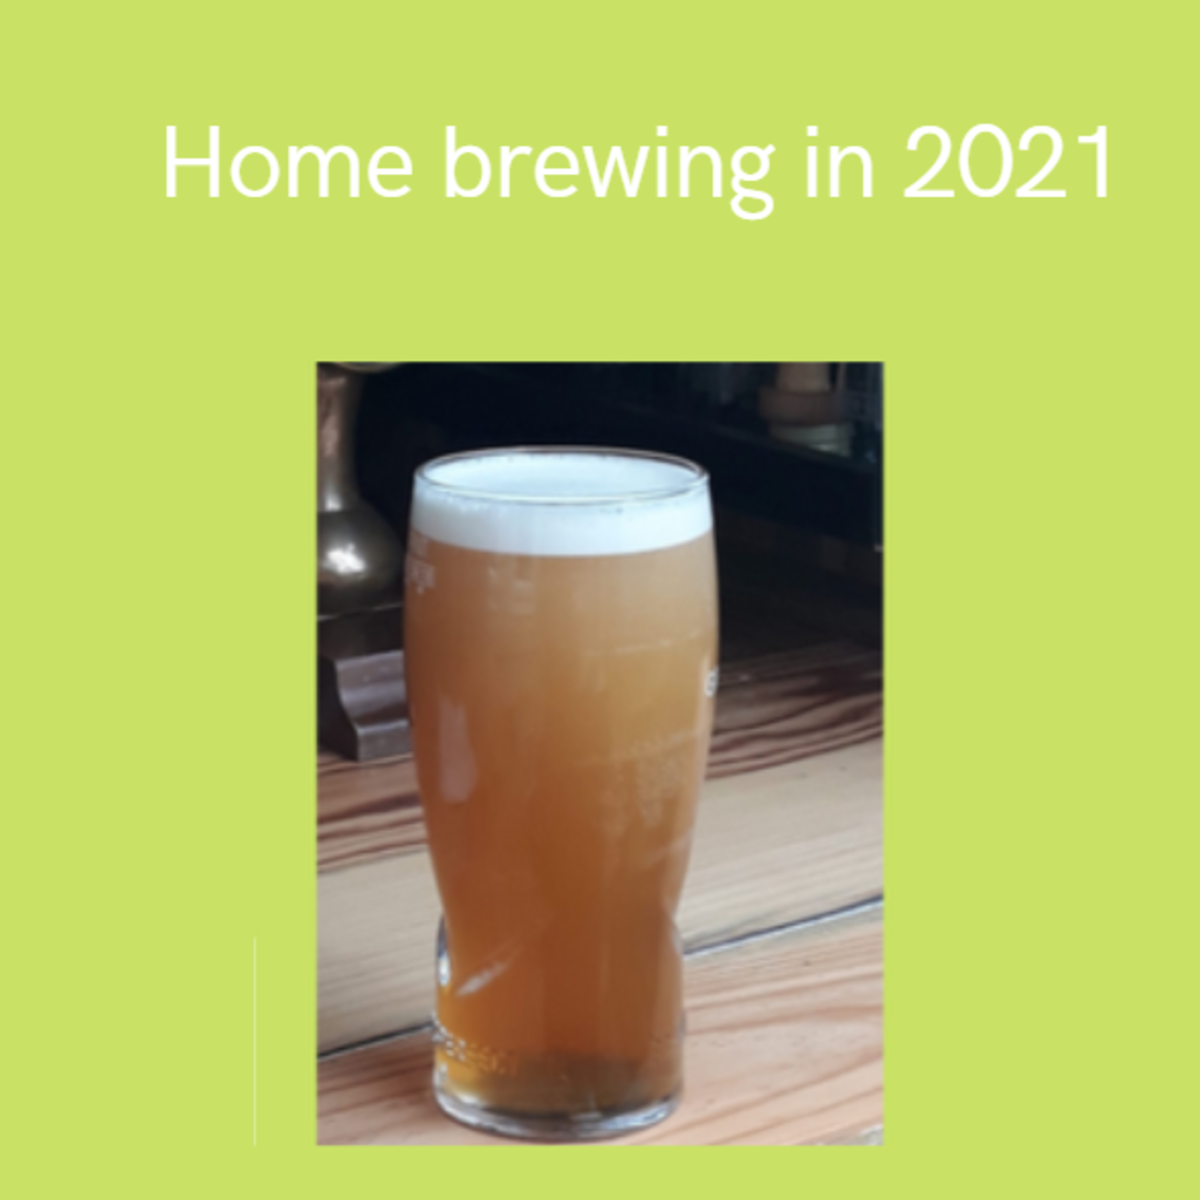 Home brewing in 2021